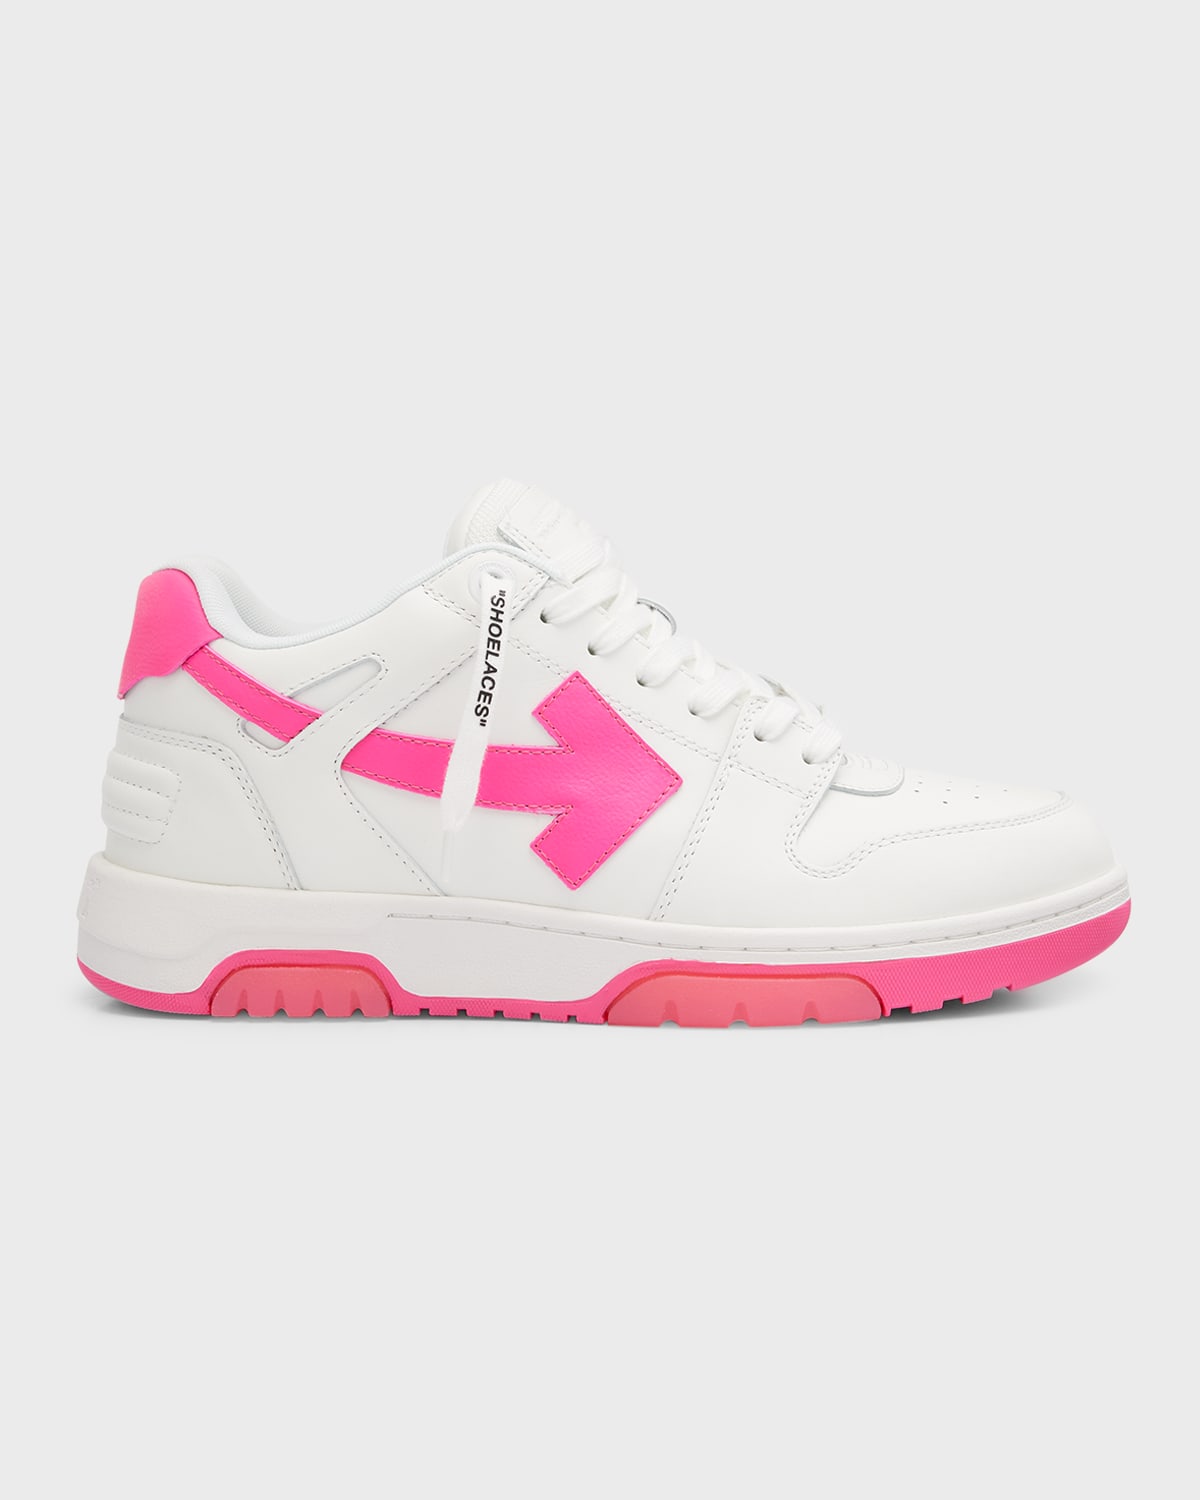 Off-White Out Of Office Arrow Calfskin Sneakers | Neiman Marcus